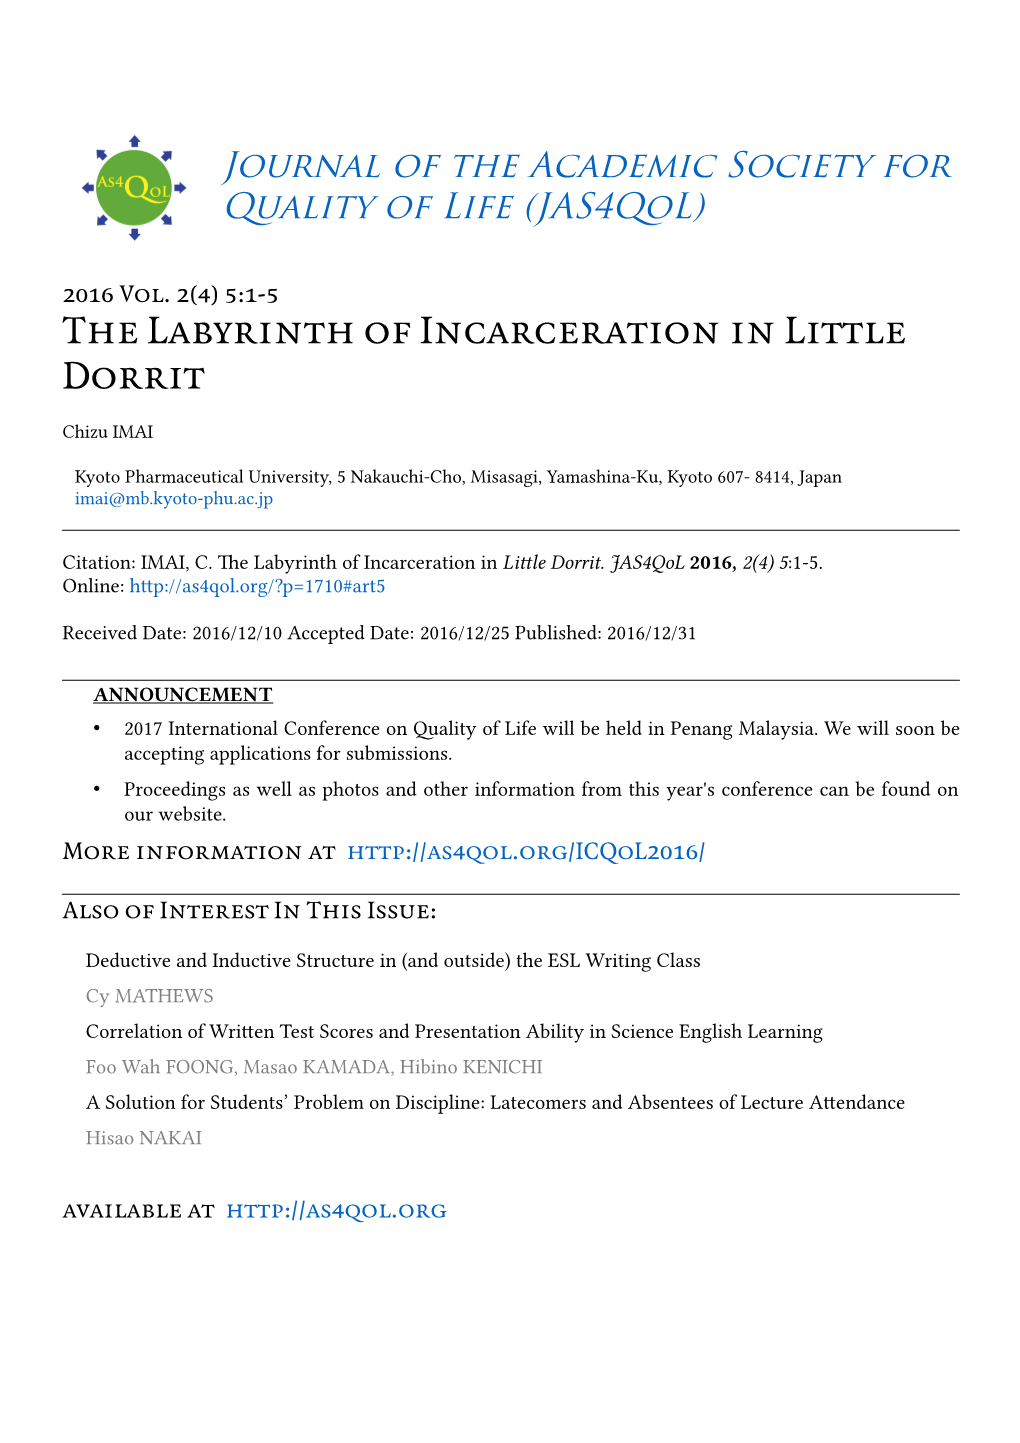 The Labyrinth of Incarceration in Little Dorrit